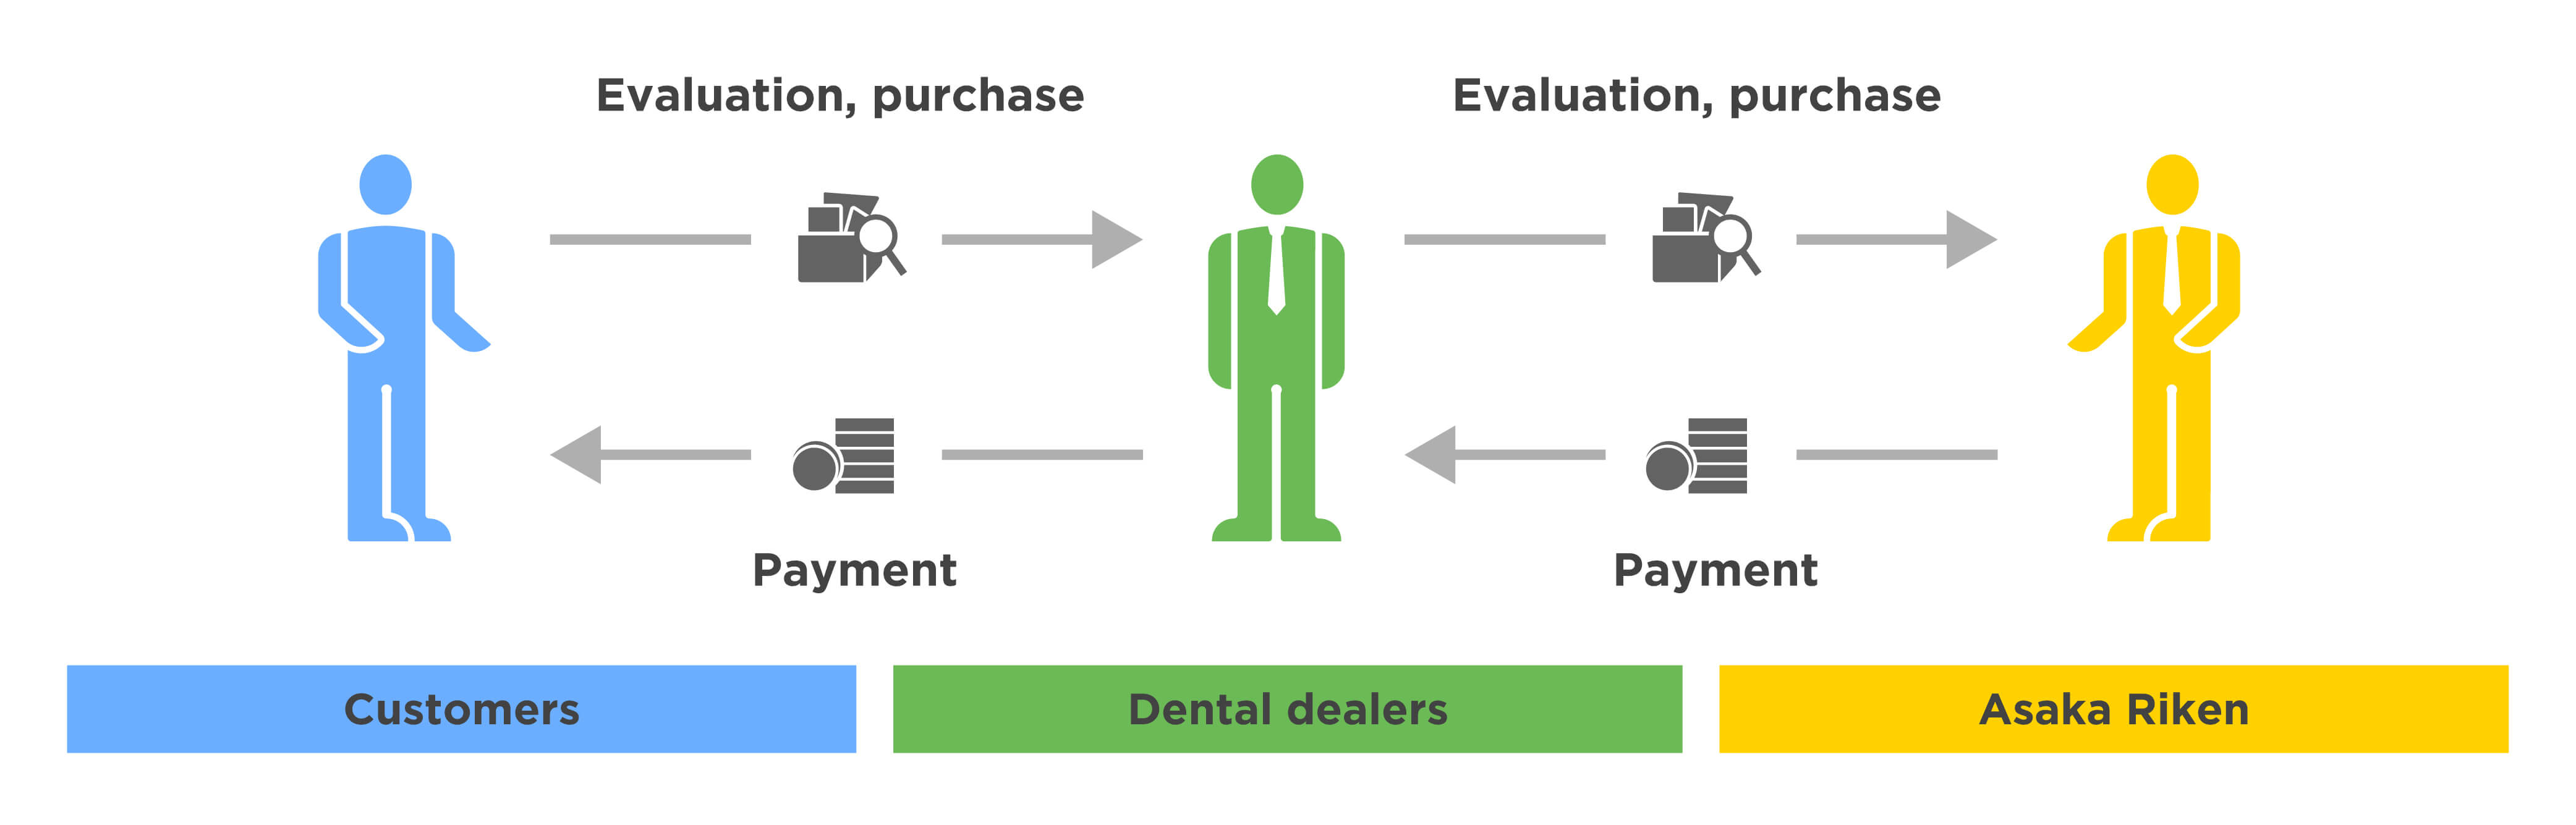 evaluation and purchase flow